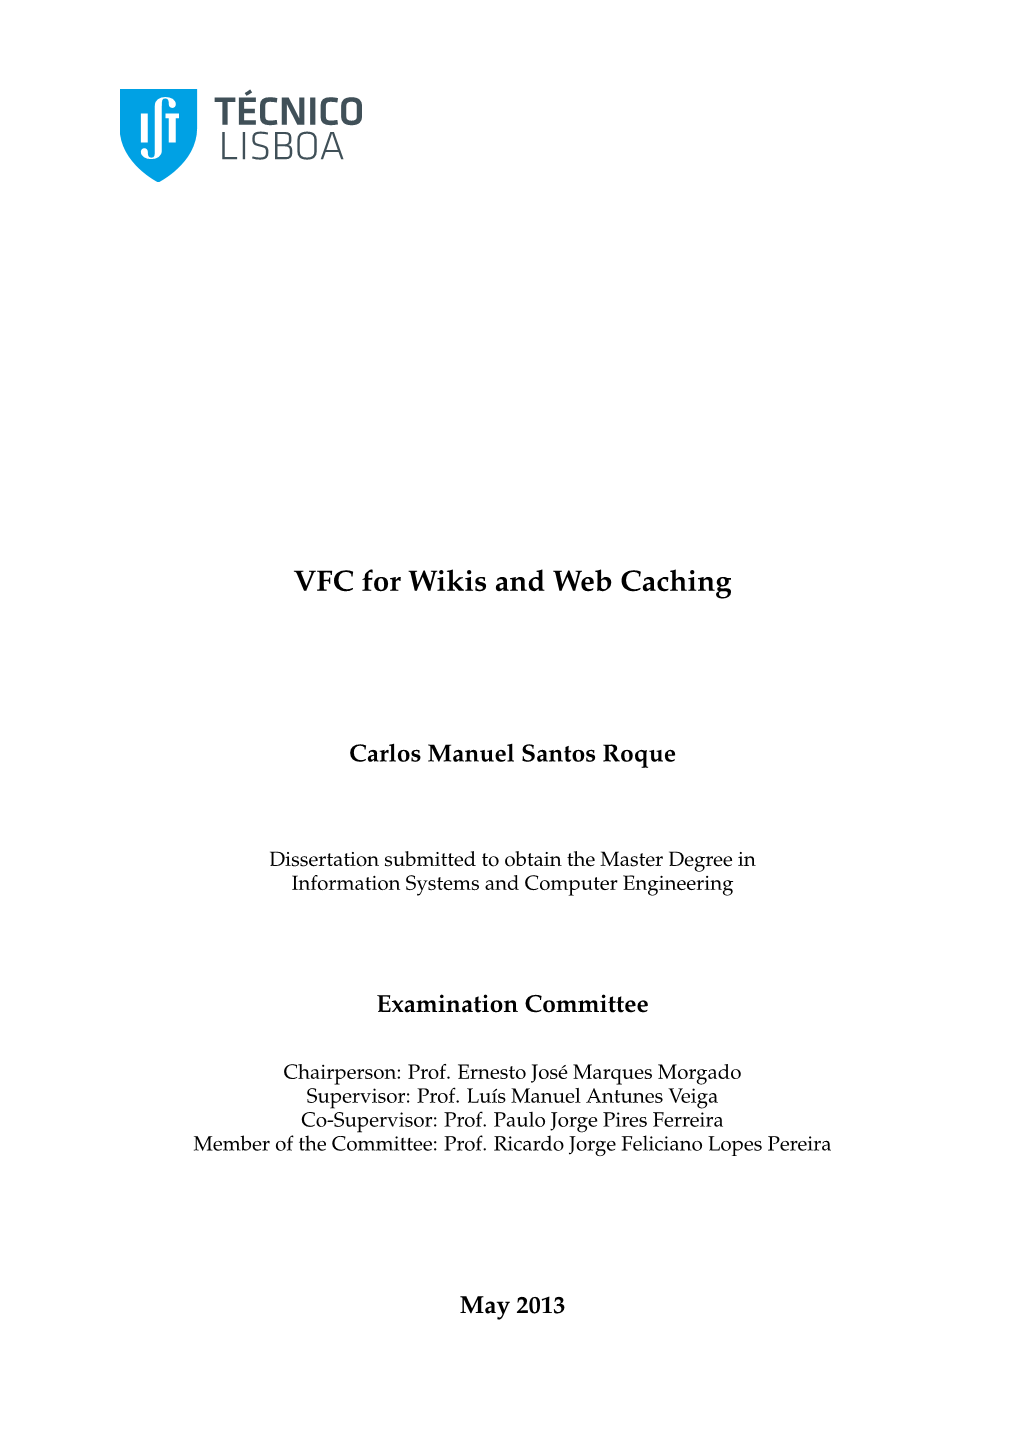 VFC for Wikis and Web Caching